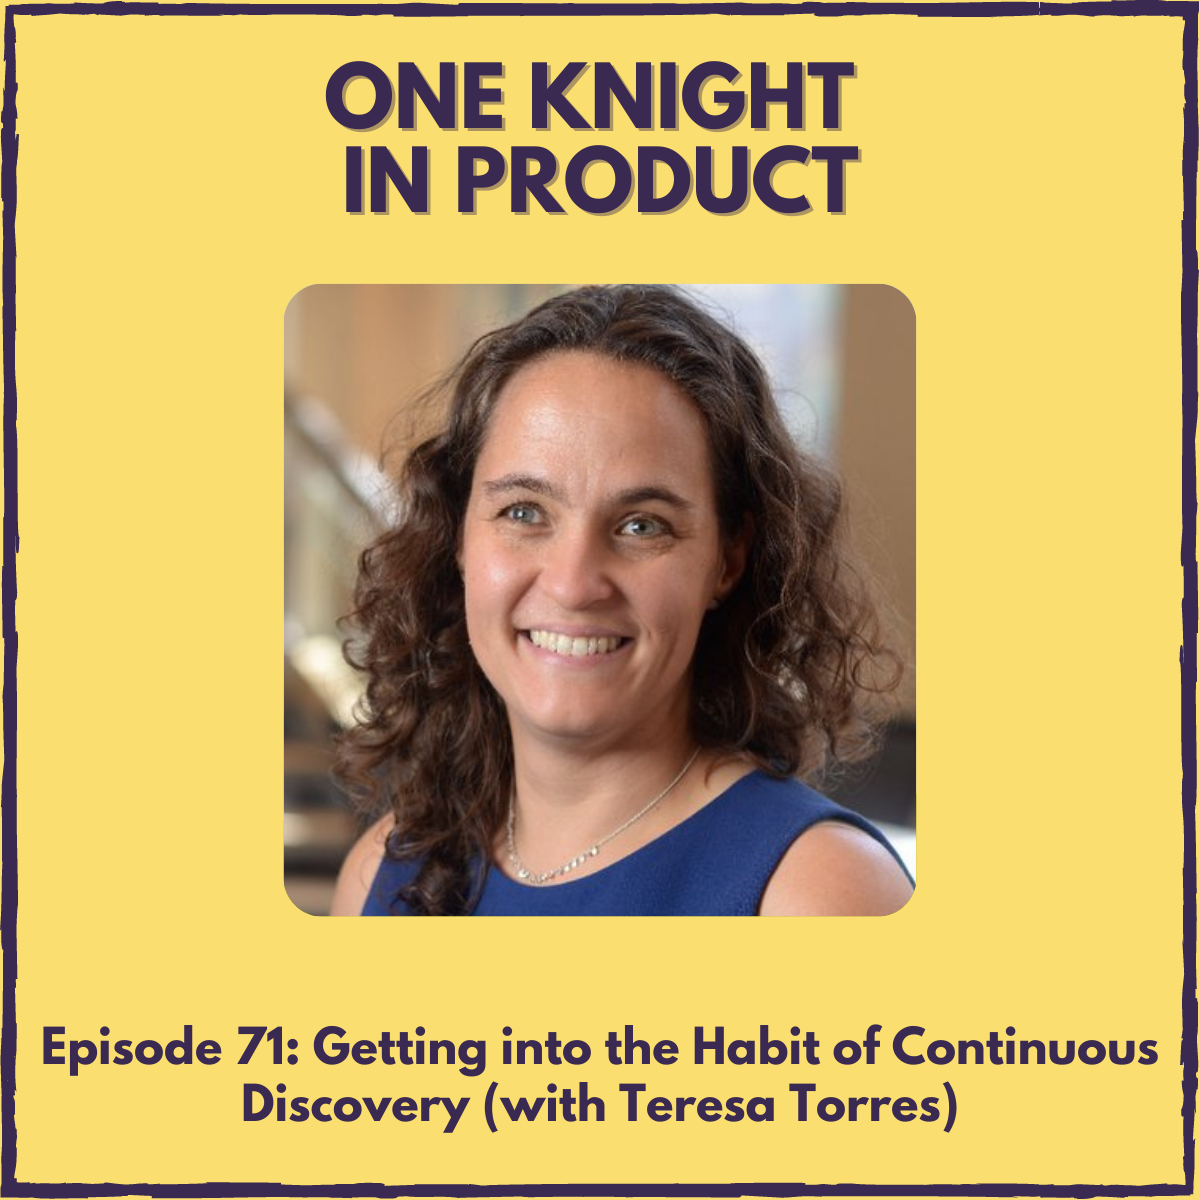 Getting into the Habit of Continuous Discovery (with Teresa Torres, author "Continuous Discovery Habits")